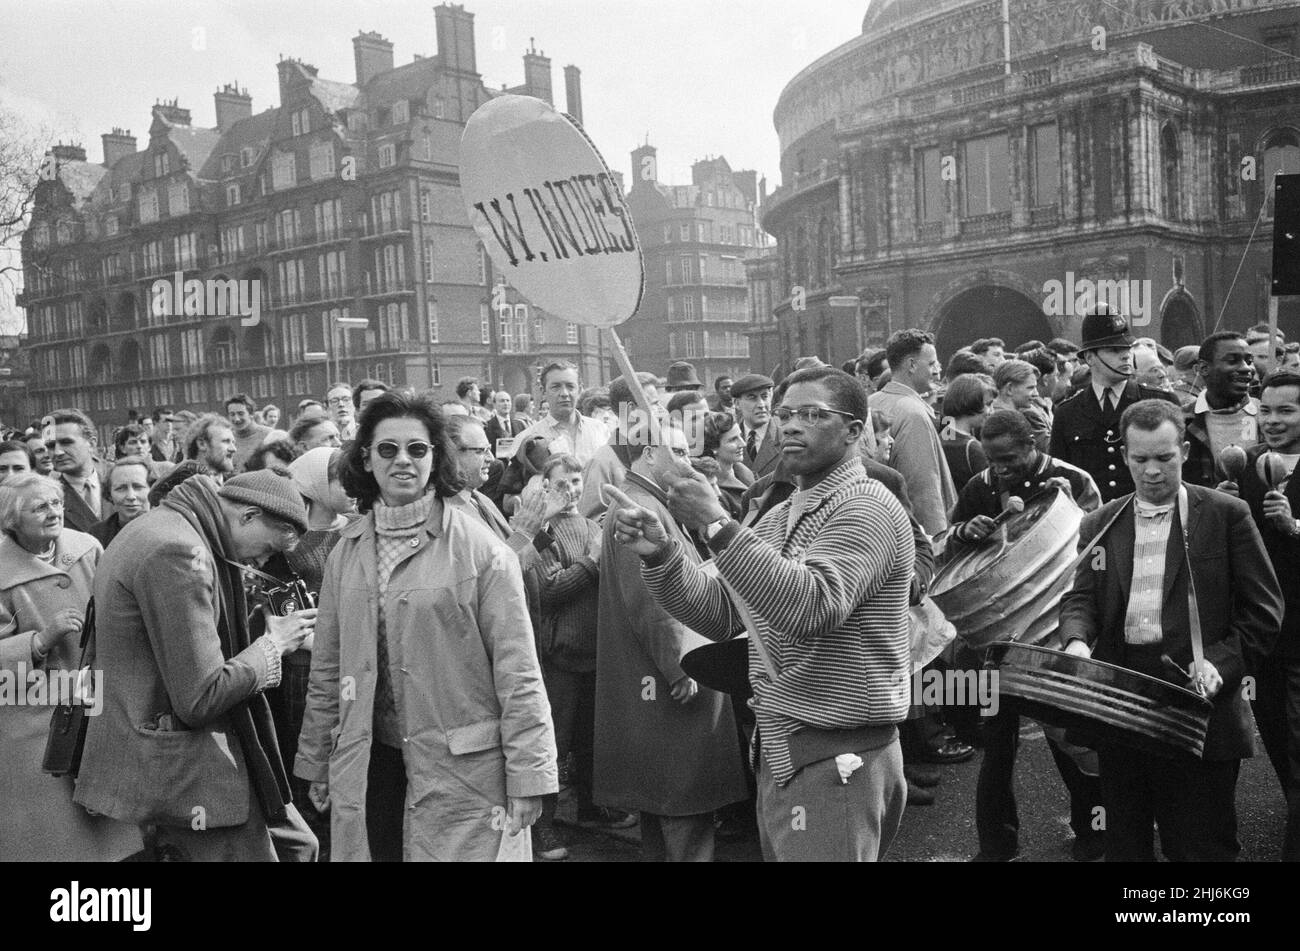 Ban The Bomb movement four day march from the Atomic Weapons Research Establishment at Aldermaston, Berkshire, to Trafalgar Square, London, Monday 30th March 1959. Our Picture Shows ... West Indian contingent in the anti-H bomb march.¿The second annual Easter march was organised by the Campaign for Nuclear Disarmament.  Tens of thousands of people marked the end of the Aldermaston march with a rally in central London. This was the largest demonstration London had seen in the 20th Century. Stock Photo